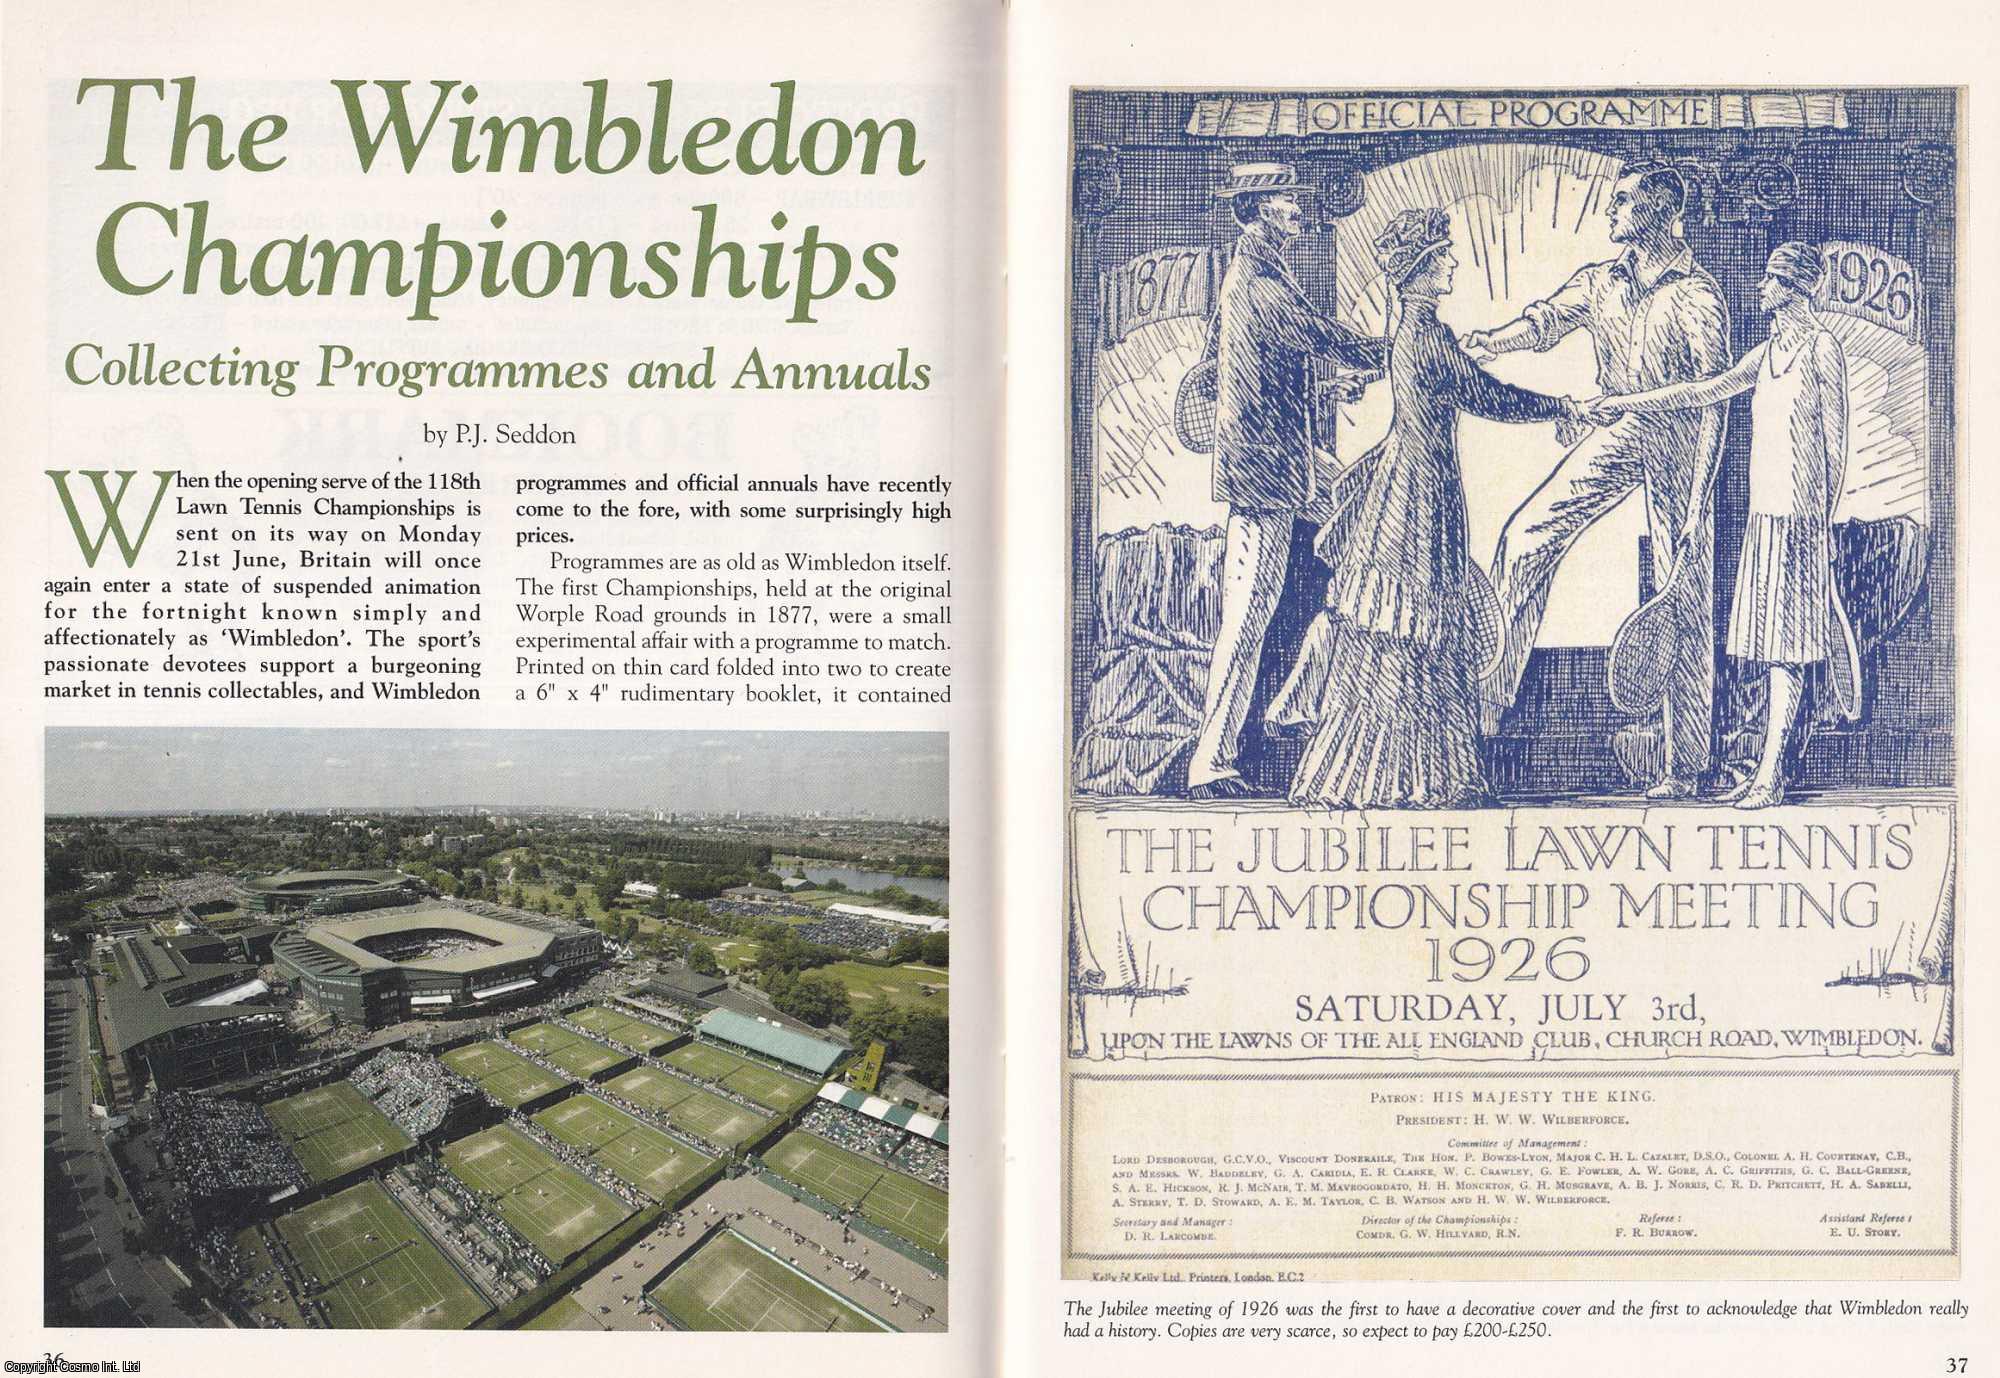 P. J. Seddon - The Wimbledon Championships. Collecting Programmes and Annuals. This is an original article separated from an issue of The Book & Magazine Collector publication.